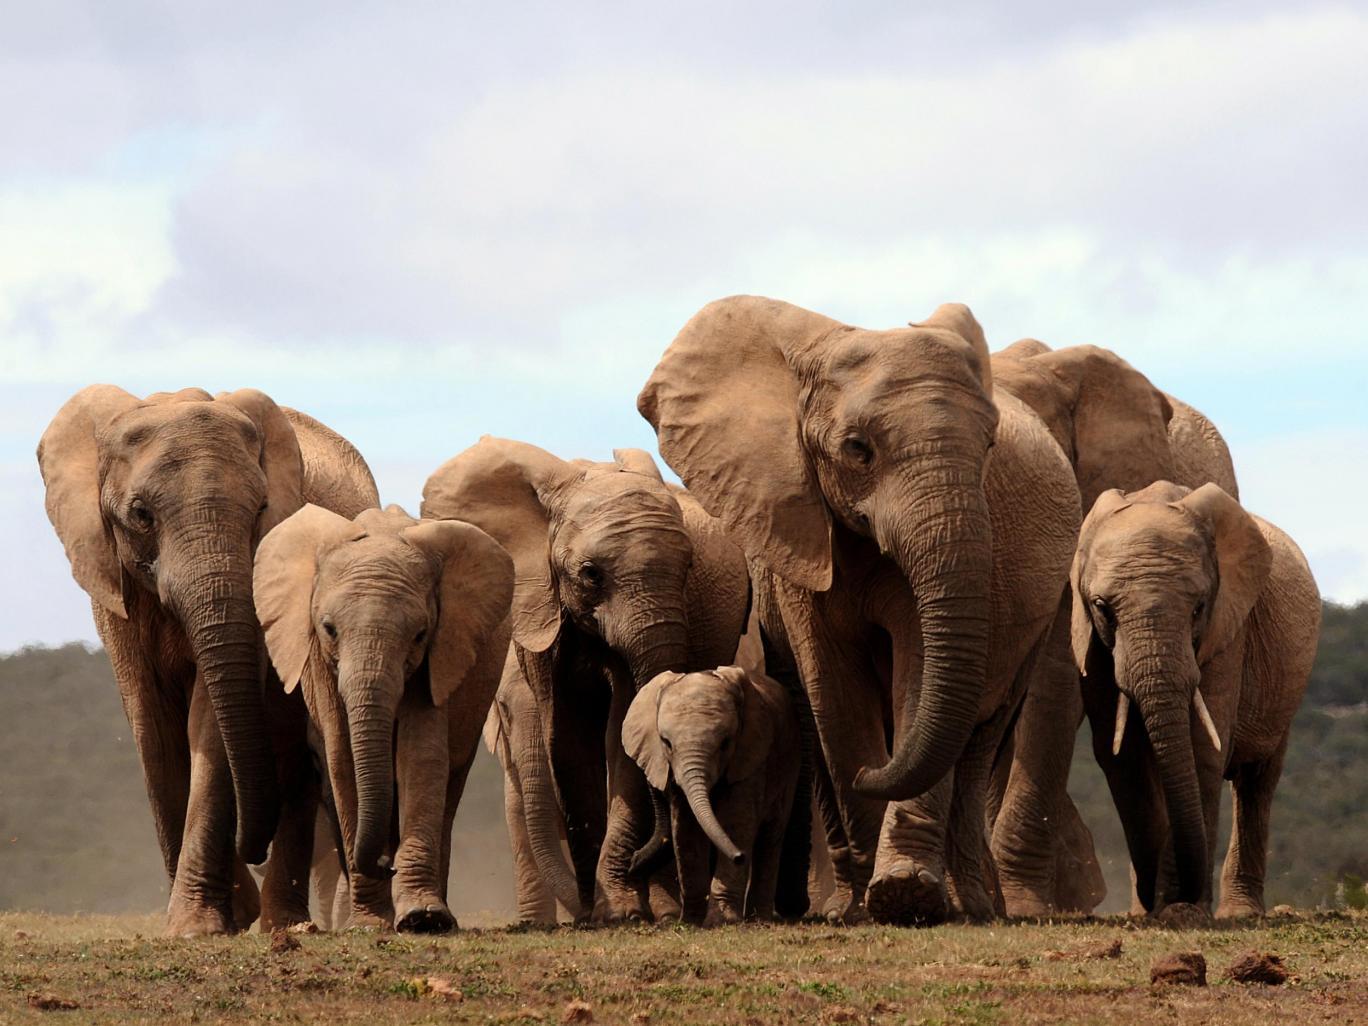 Hundreds of elephants have died mysteriously in a month in Africa - news, Death, Elephants, Animals, Epidemic, Poisoning, Africa, Nature, Longpost